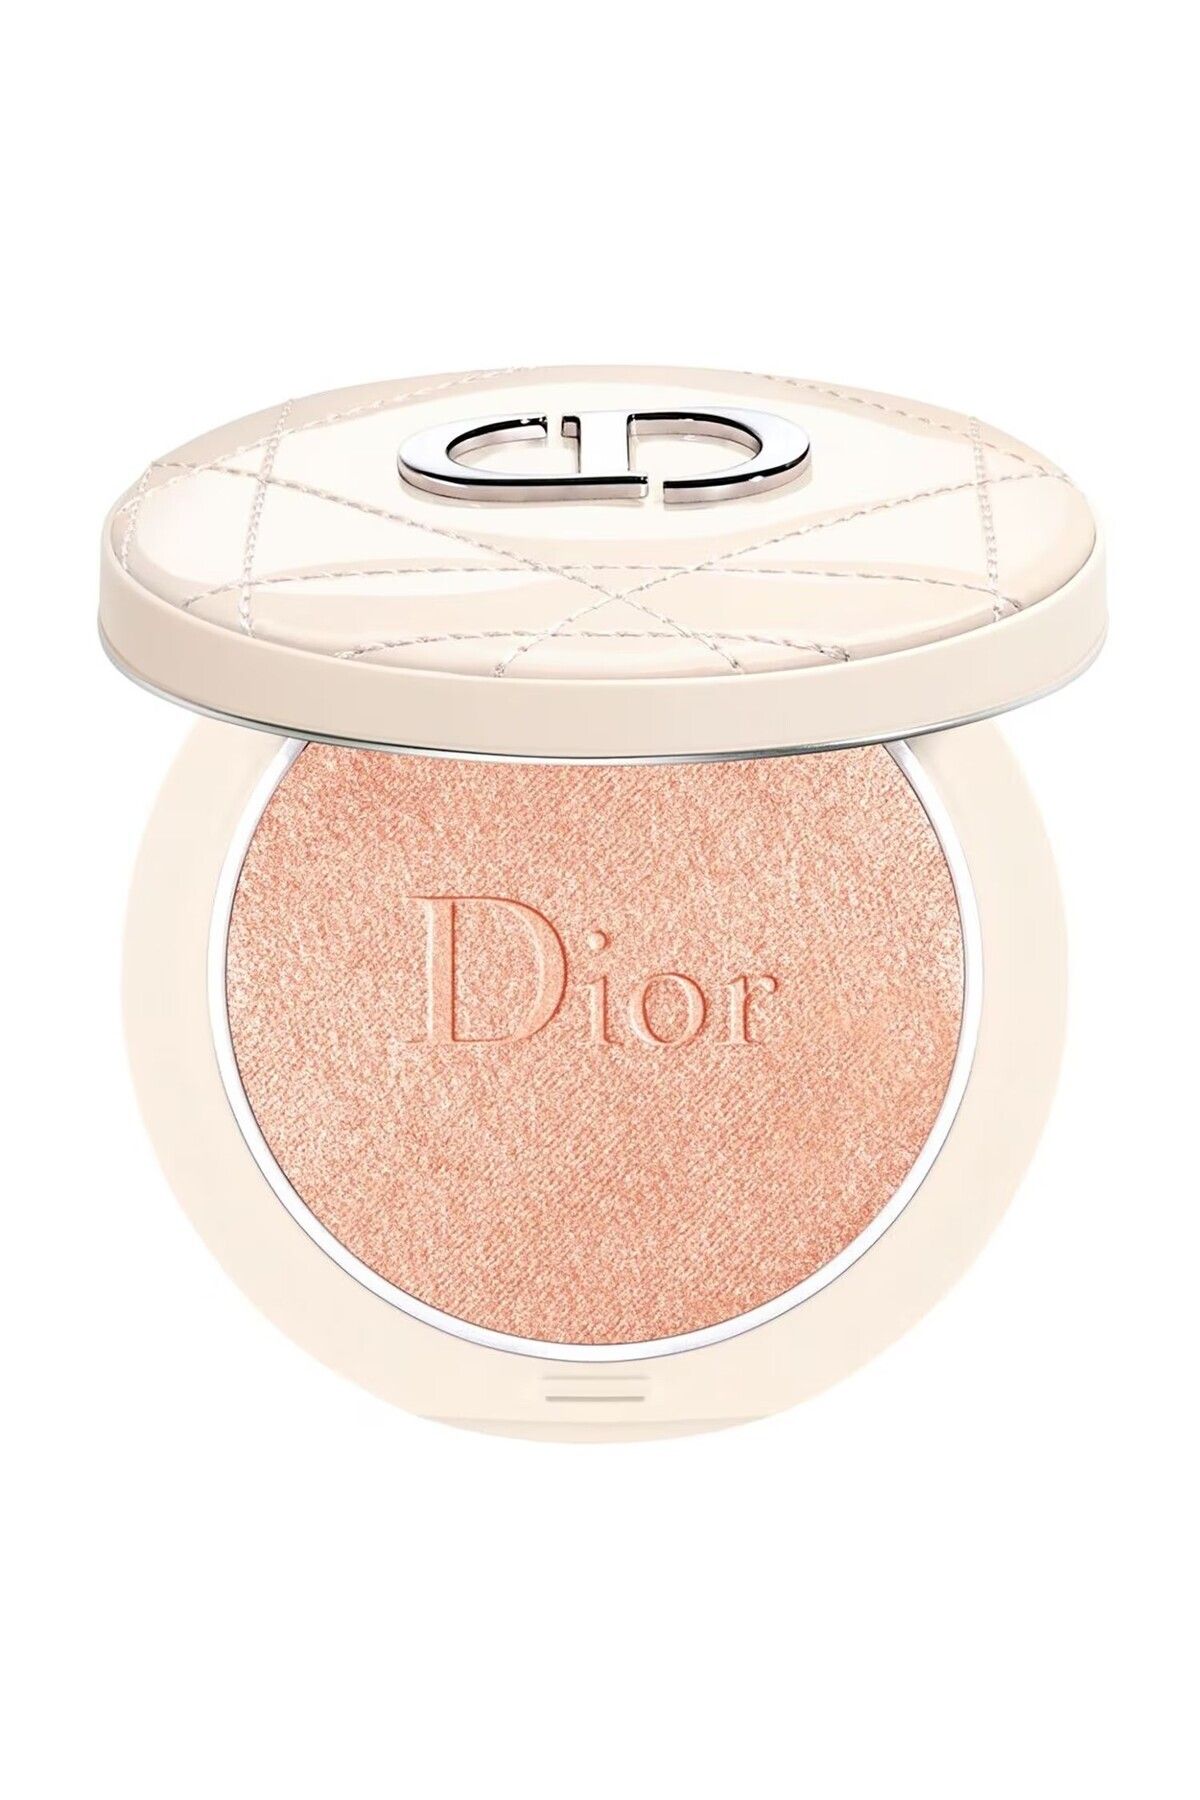 Dior FOREVER COUTURE - 95% NATURAL, ILLUMİNATOR THAT STRENGTHENS SKİN RADİANCE 6 GR PSSN2042